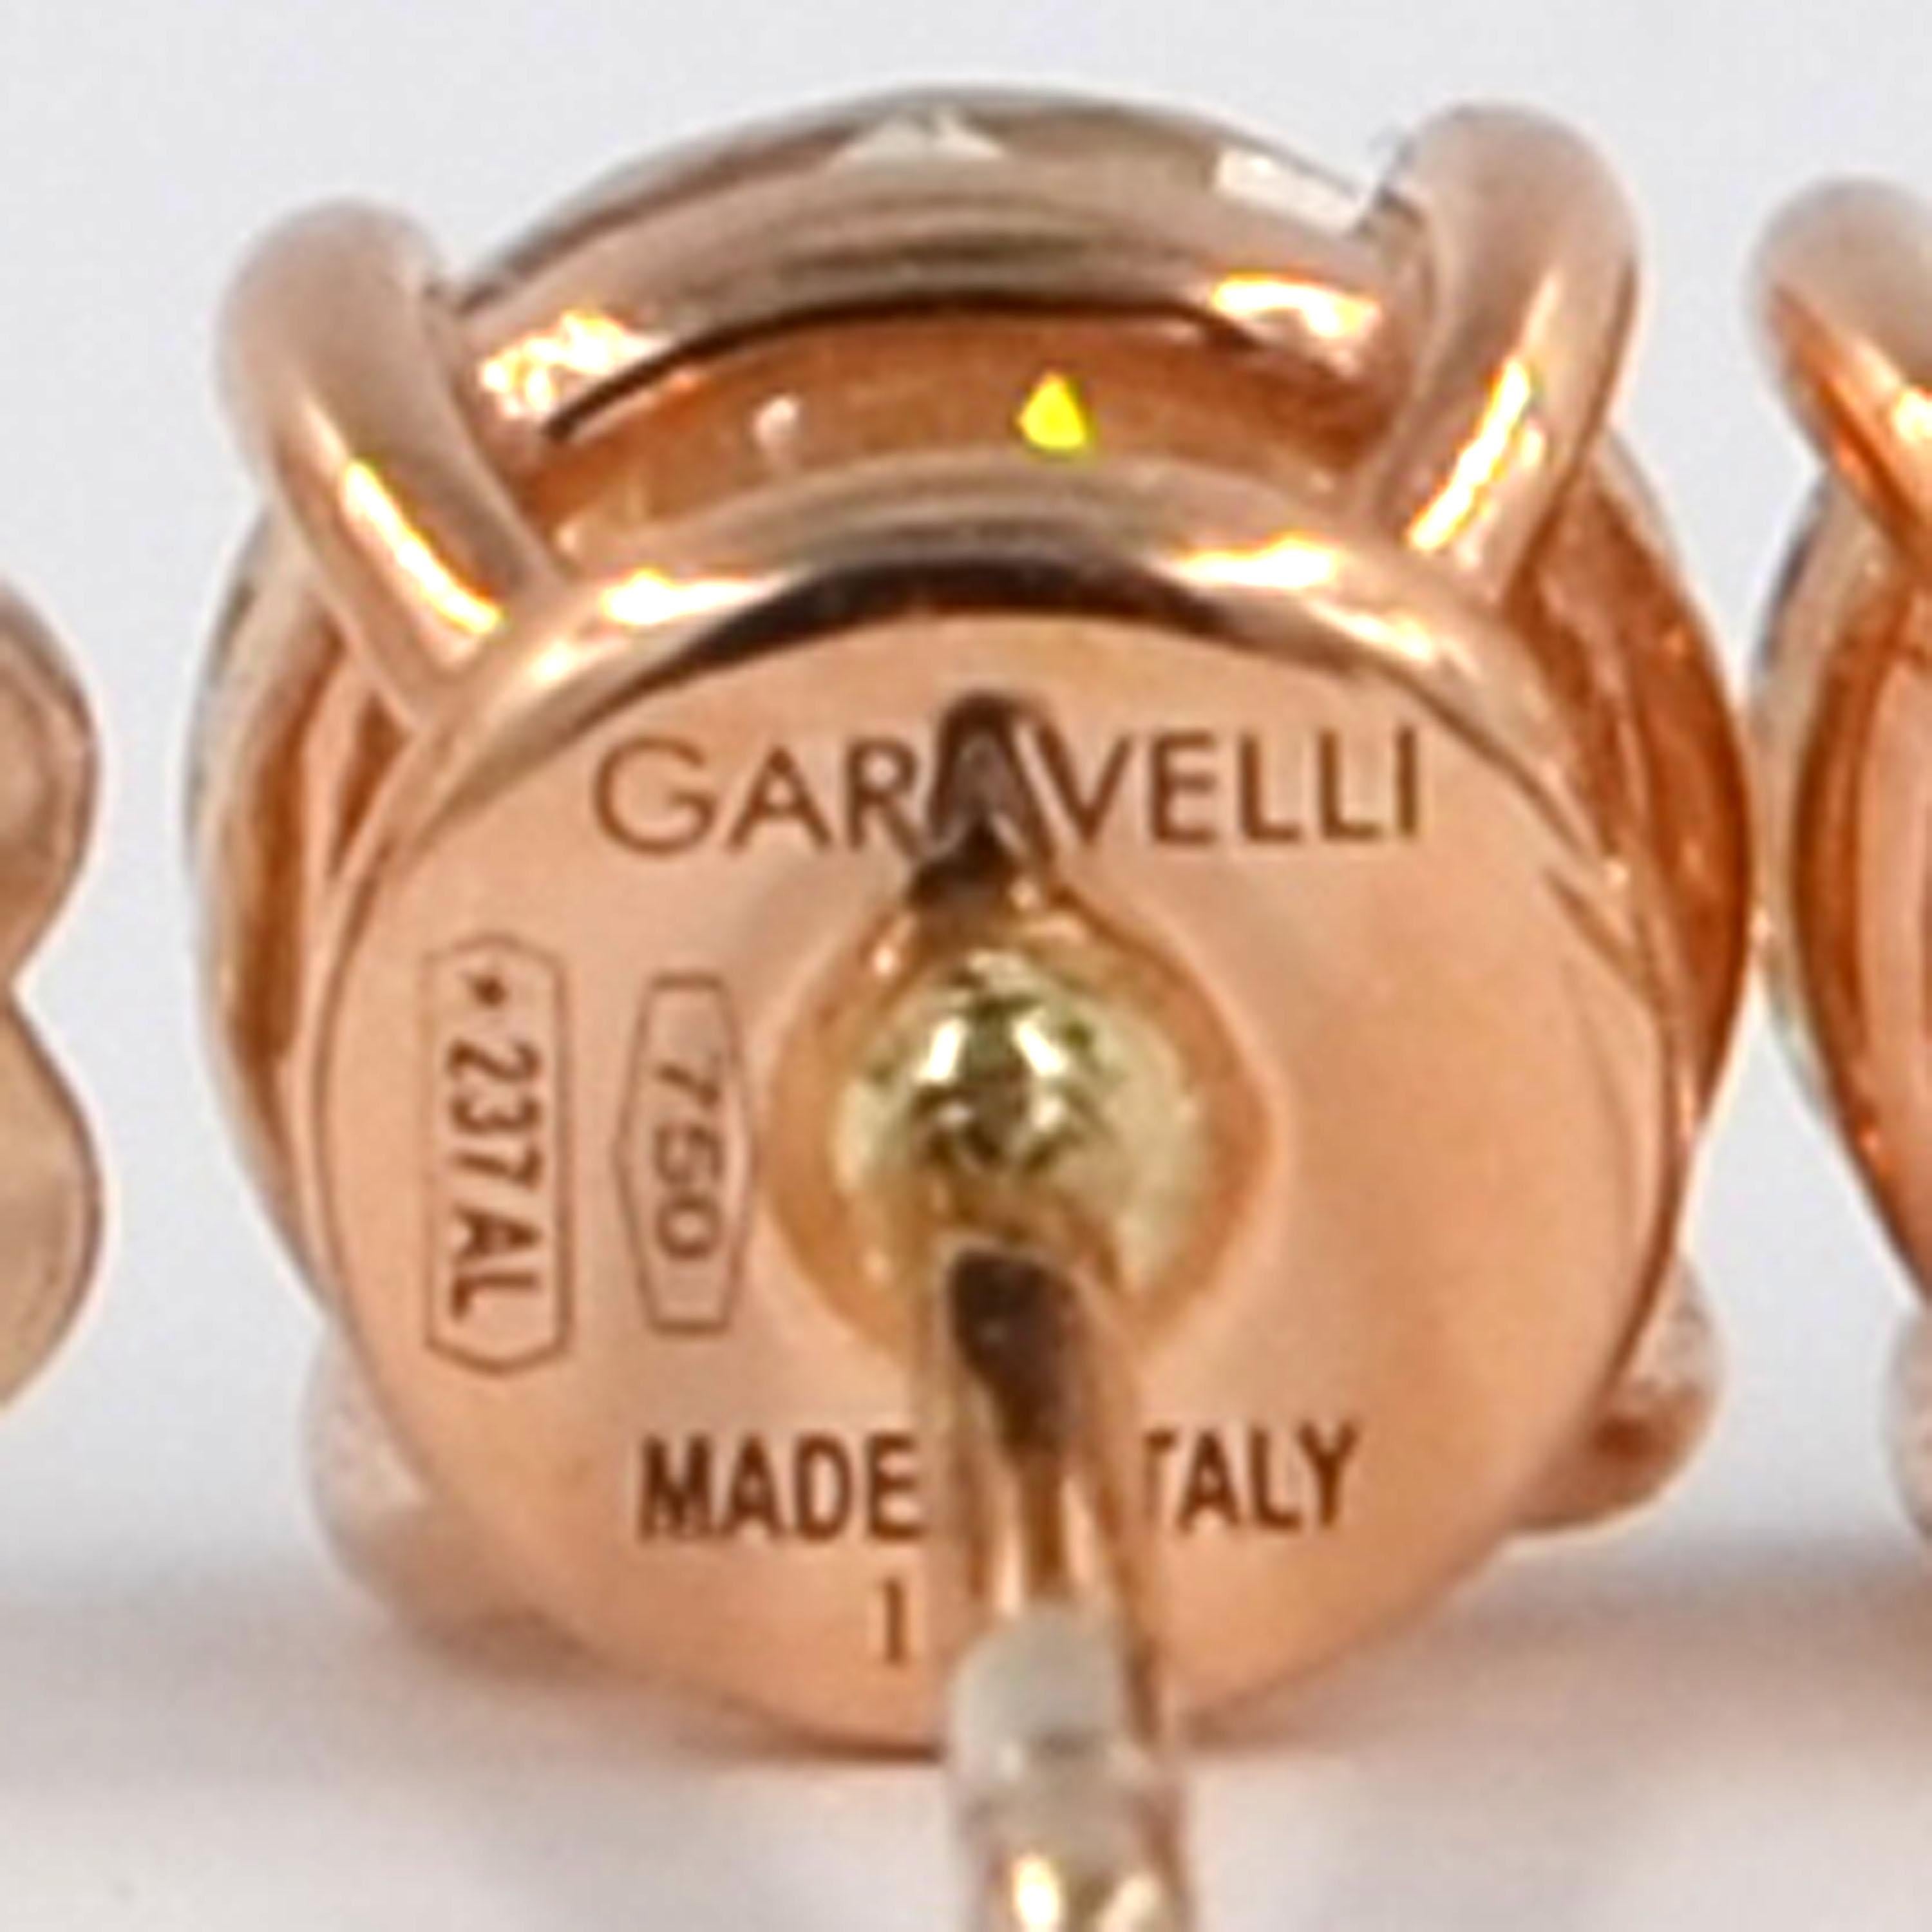 Garavelli 18kt Rose Gold Diamonds Stud Earrings
Diamond round center stone weighting ct 1.06 and ct 1.03
Laboratory diamond verification    clarity P1 Color K and SI1 color L
Made In Italy 
18kt GOLD gr  :3.20
WHITE DIAMONDS  ct 2.09 in